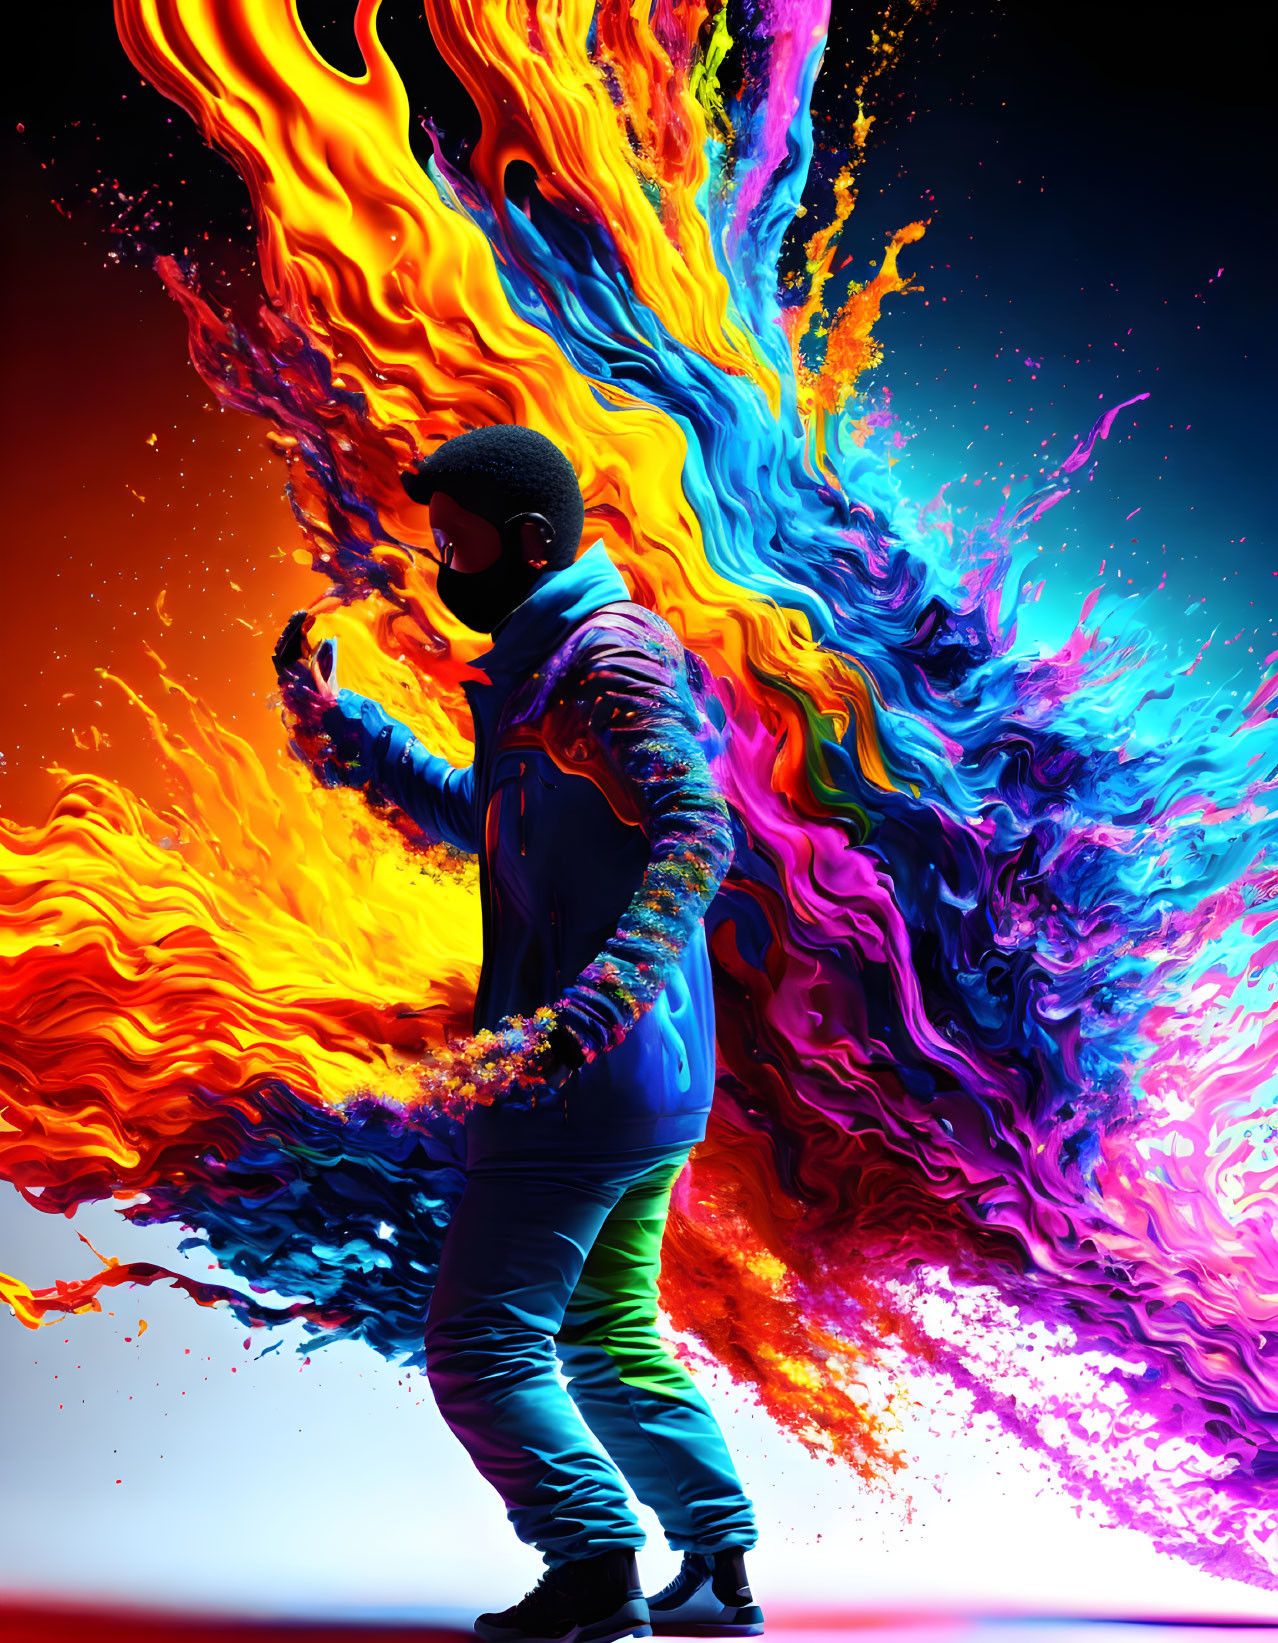 Person in Blue Jacket and Sunglasses with Fiery Liquid Colors